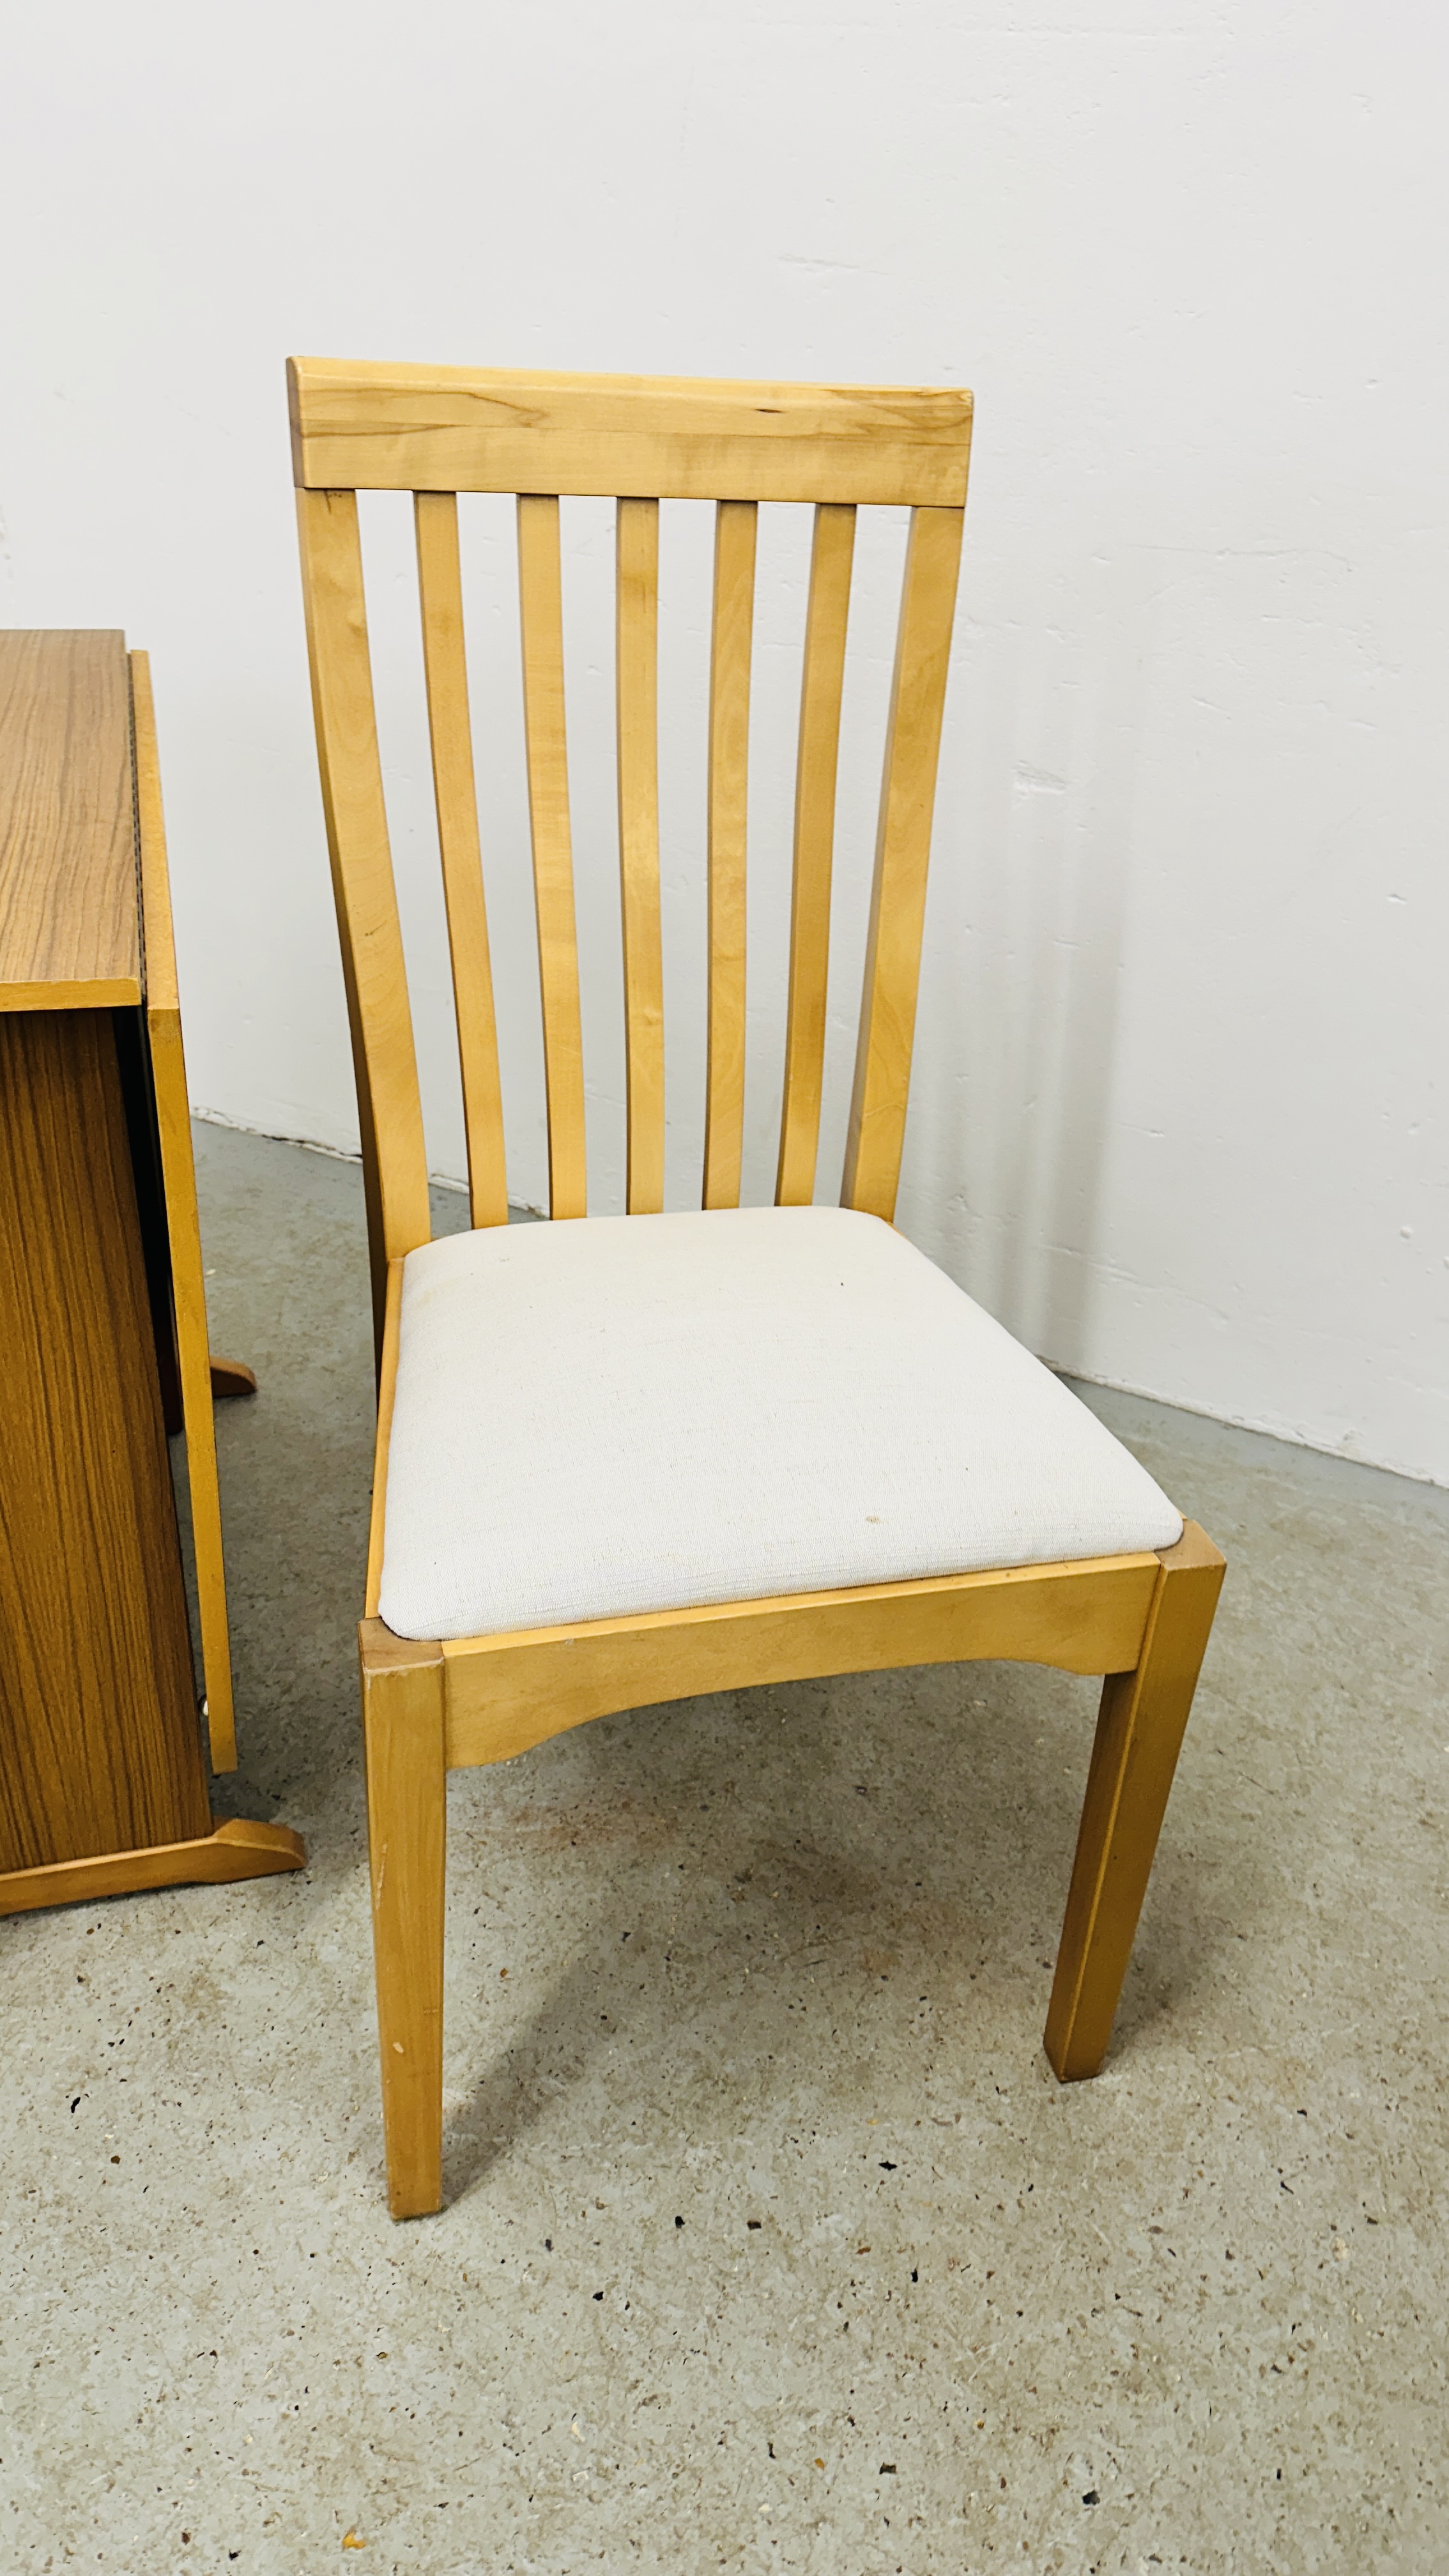 PAIR OF UPHOLSTERED SEATED BEECH WOOD DINING CHAIRS ALONG WITH A DROP FLAP LAMINATE TOPPED DINING - Image 3 of 5